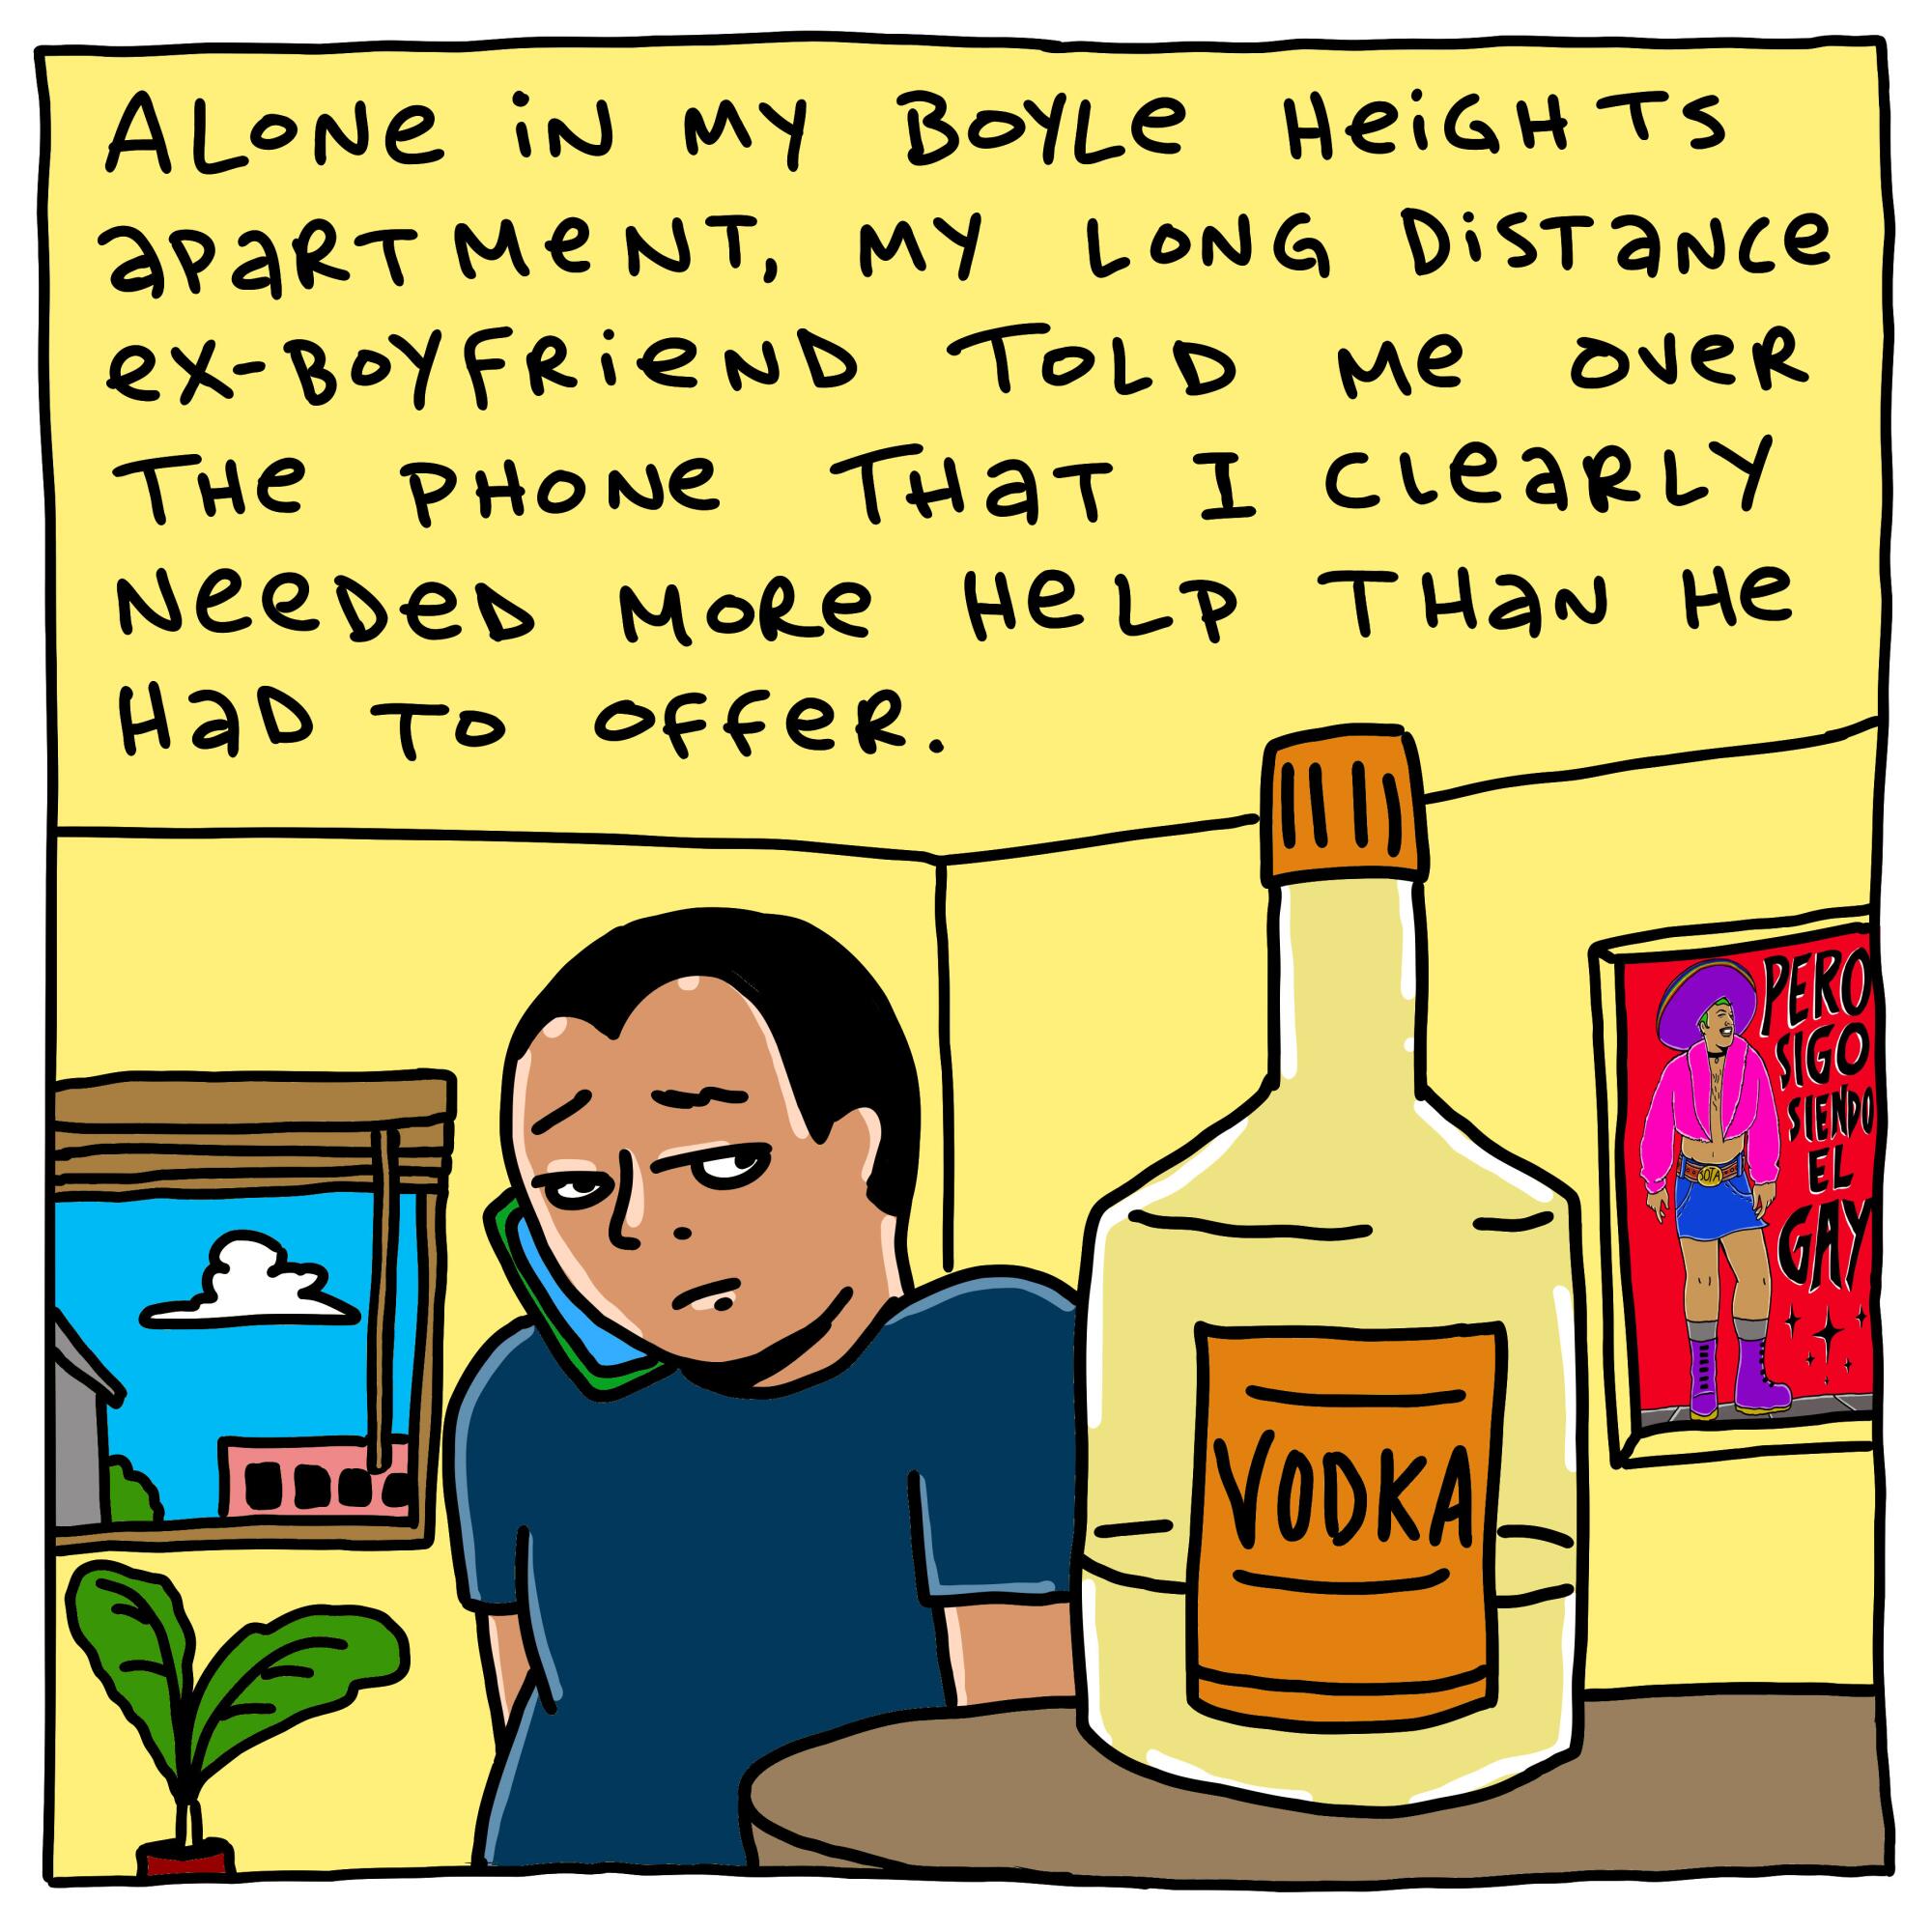 Alone in my Boyle Heights apartment, my ex-boyfriend told me over the phone that I needed help. 